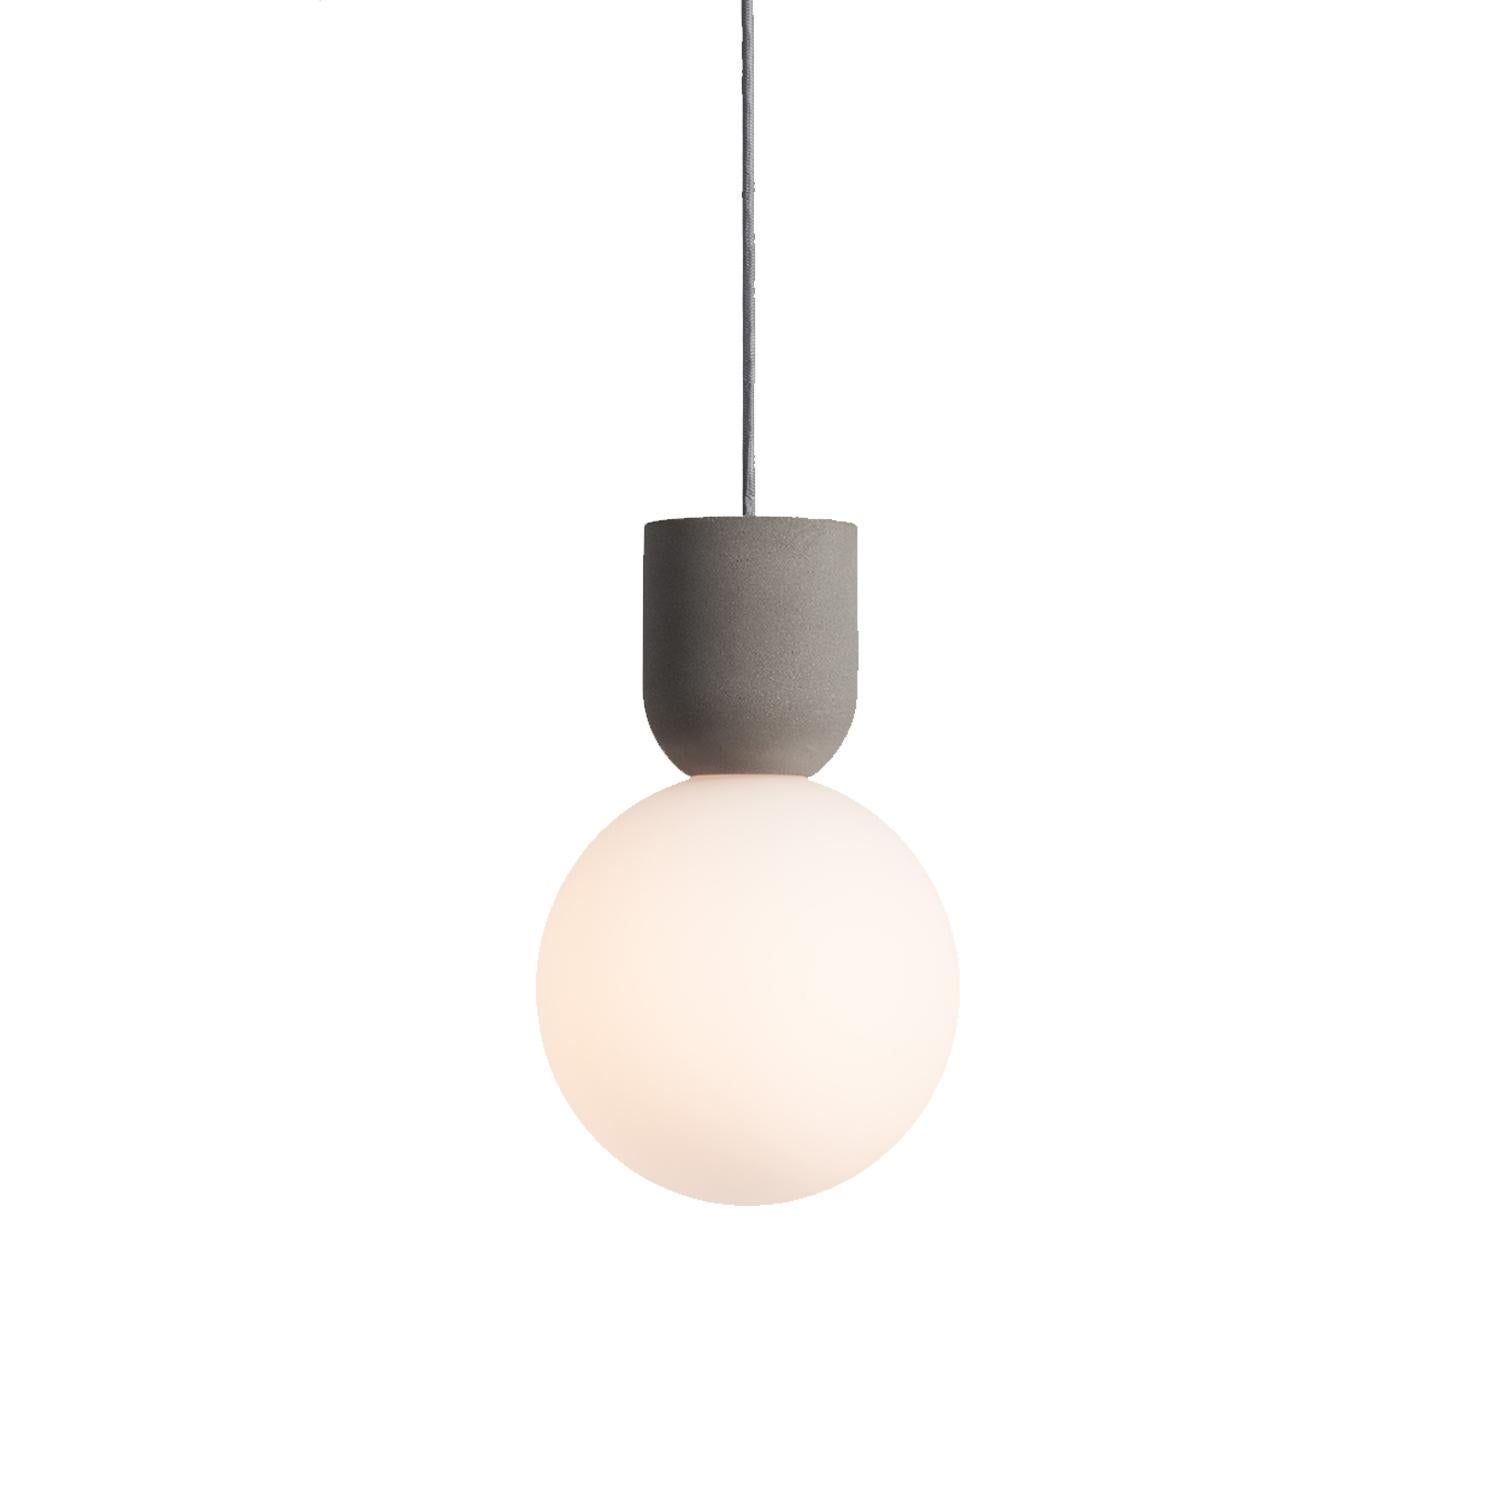 Staying steadfast with Seed Design’s “Castle series” signature concrete finish, the Castle GLO pendant and table lamp is the newest addition to the ever-so popular Castle collection. The silky smooth texture of the glass sphere paired with the